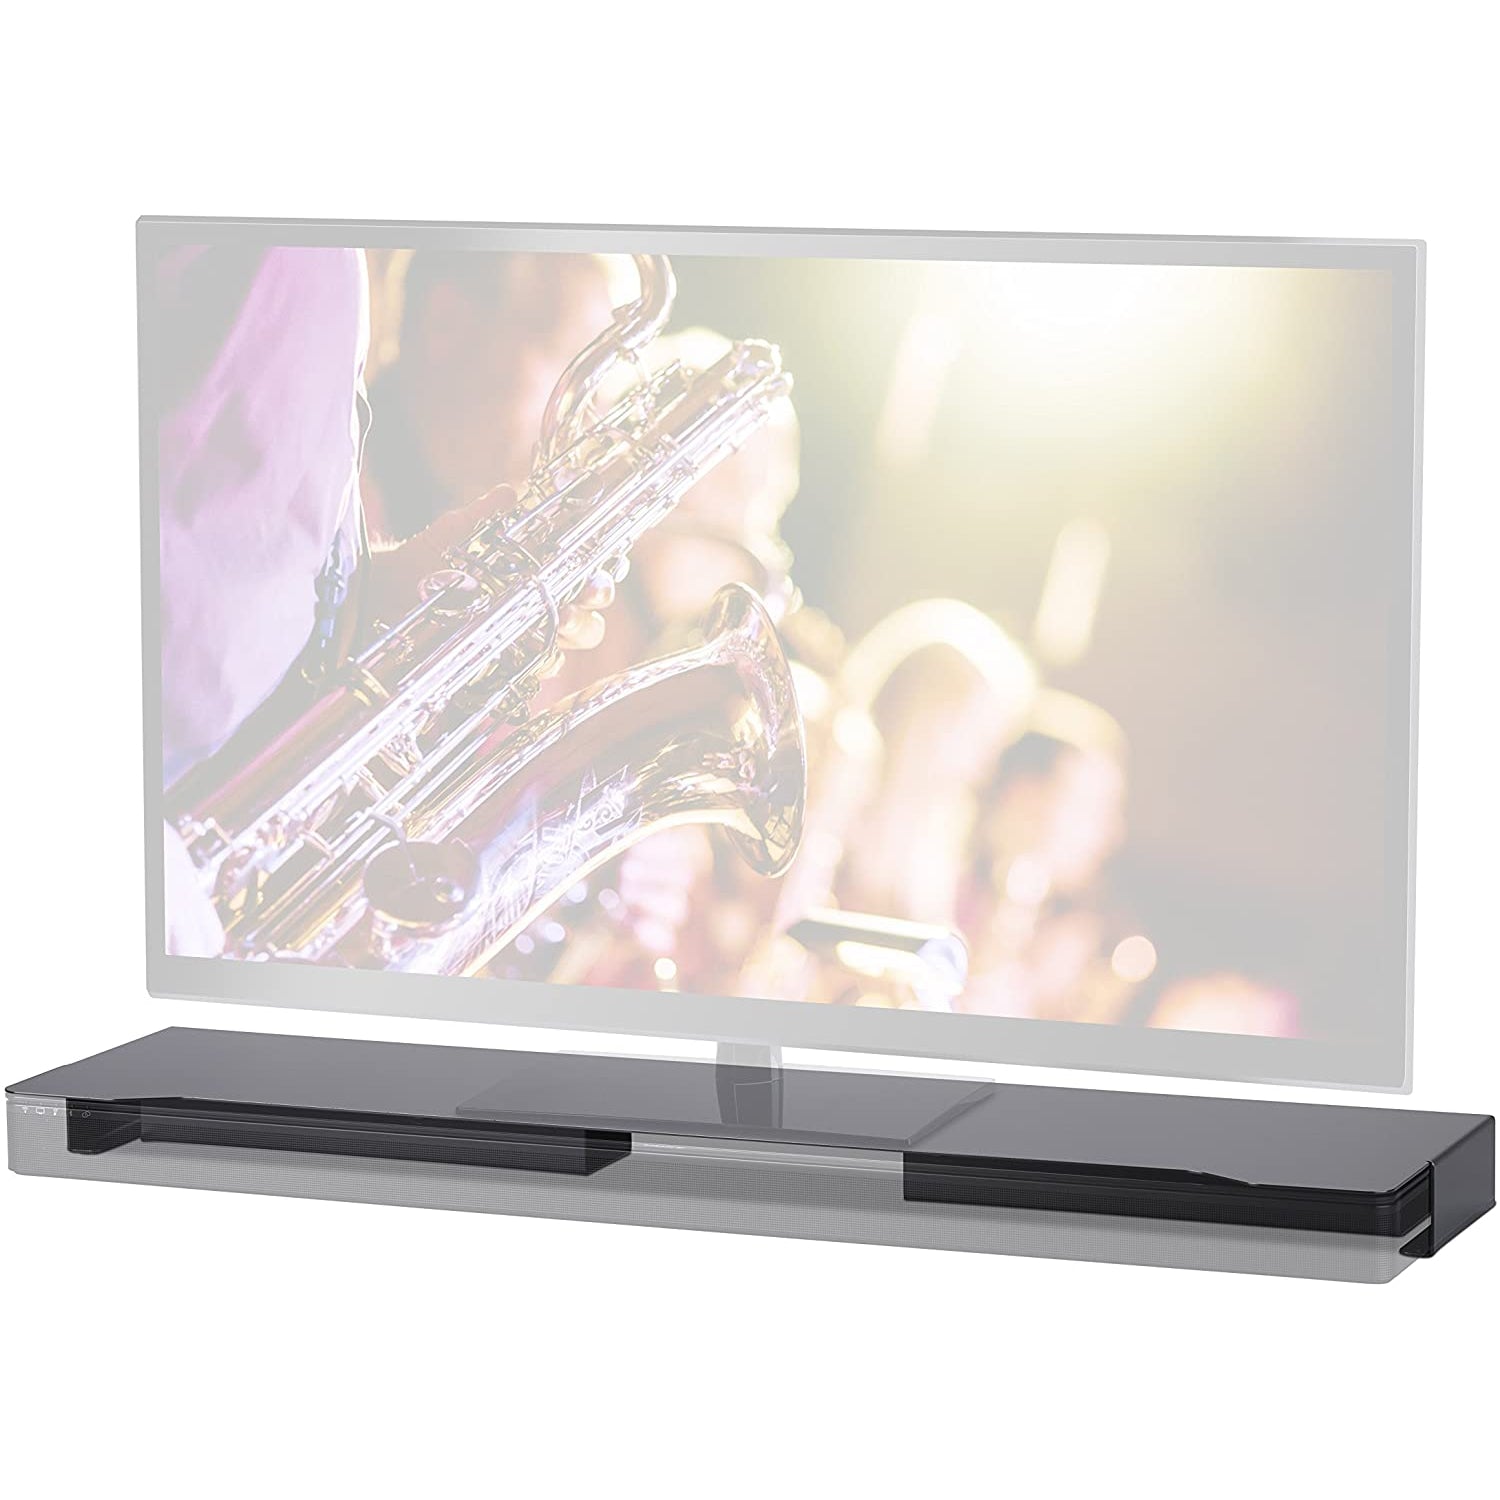 SoundXtra ST300-ST TV Stand for Bose SoundTouch 300, White